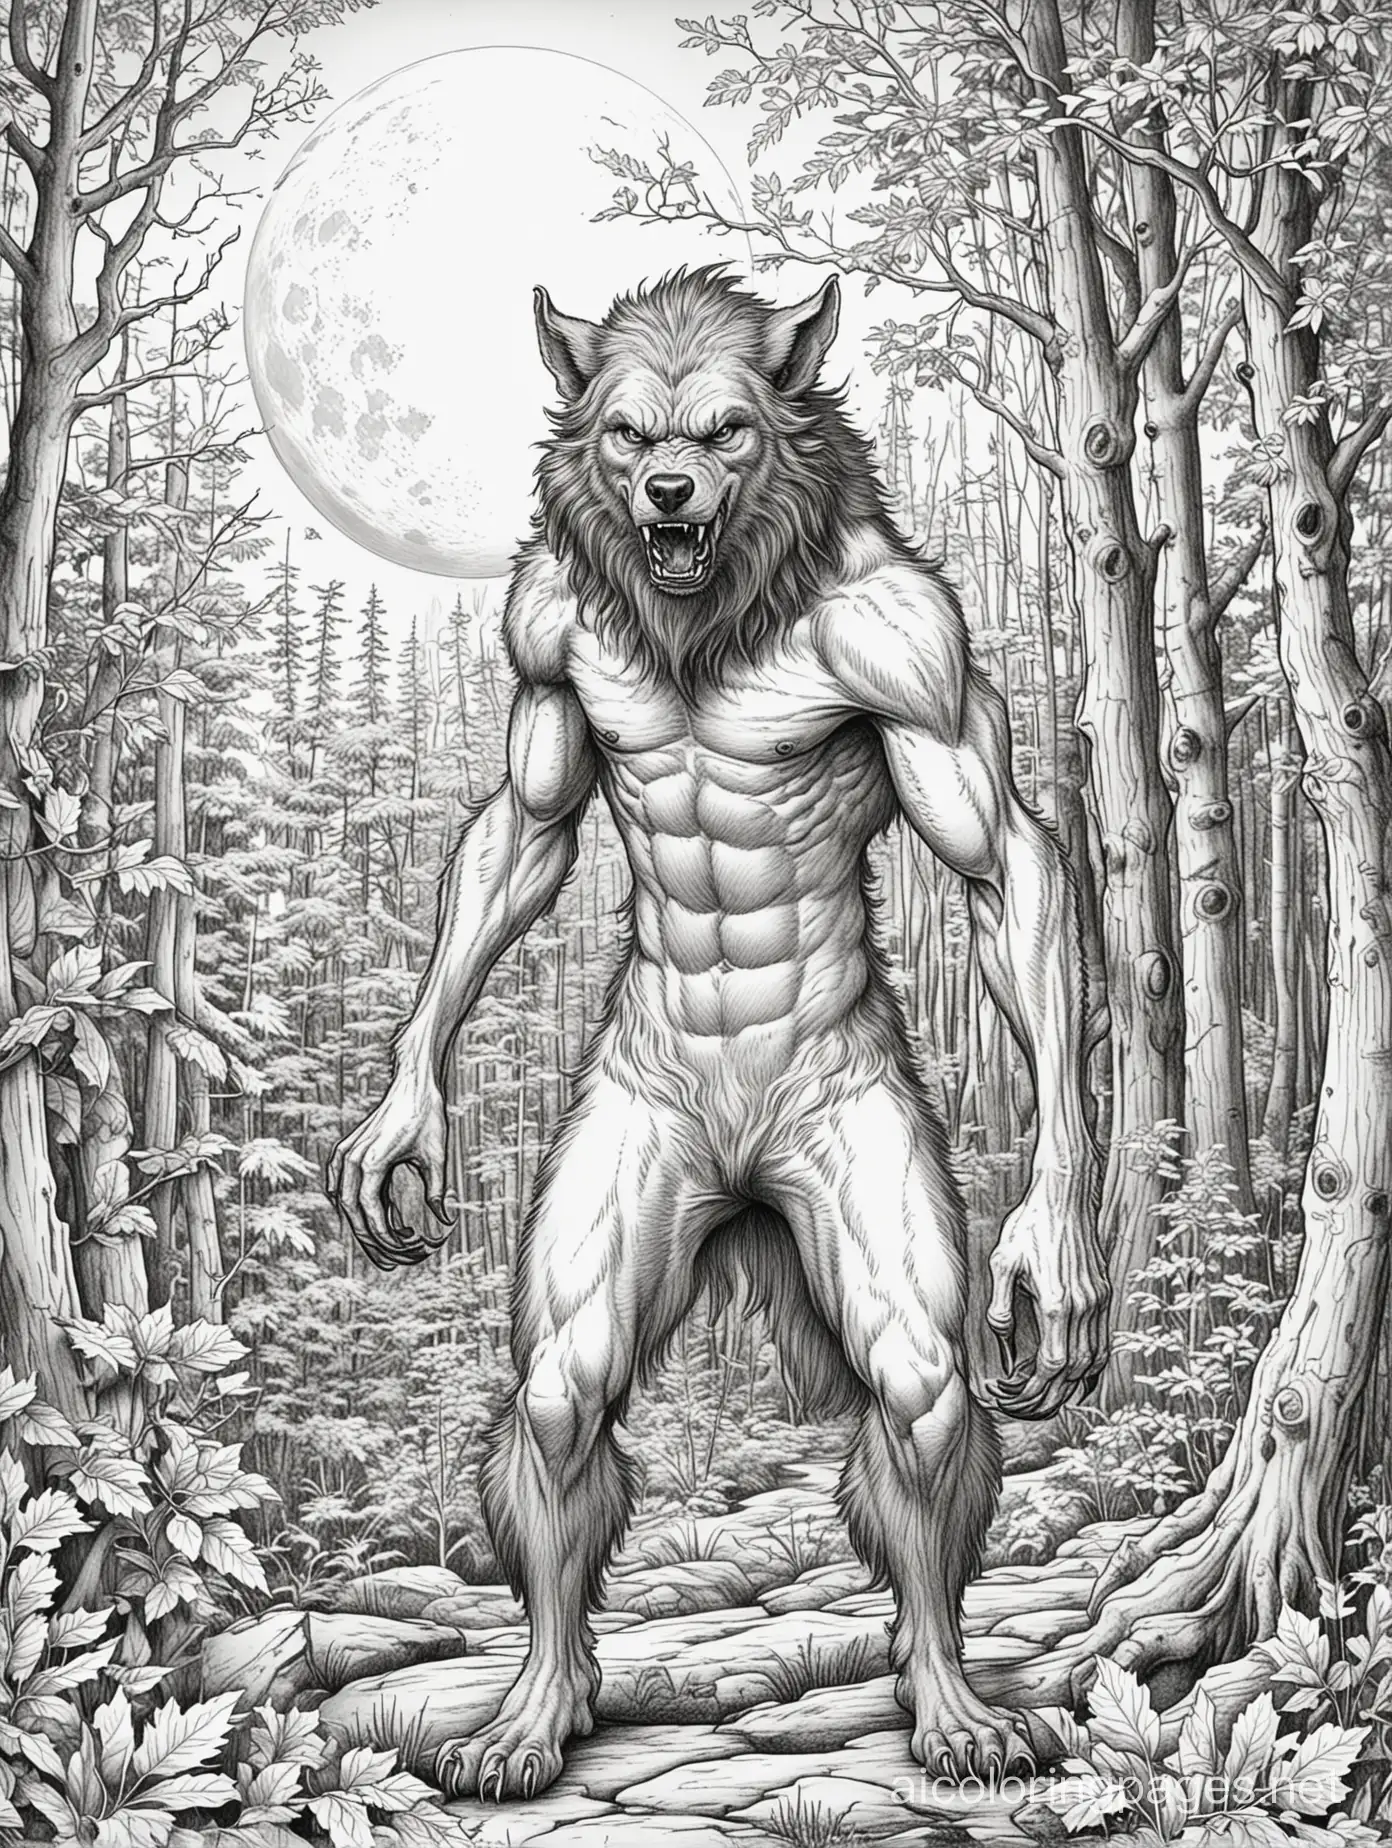 a werewolf in mi transition from human to werewolf. he should be in the woods under a full moon. add small woodland creatures. change his pose., Coloring Page, black and white, line art, white background, Simplicity, Ample White Space. The background of the coloring page is plain white to make it easy for young children to color within the lines. The outlines of all the subjects are easy to distinguish, making it simple for kids to color without too much difficulty